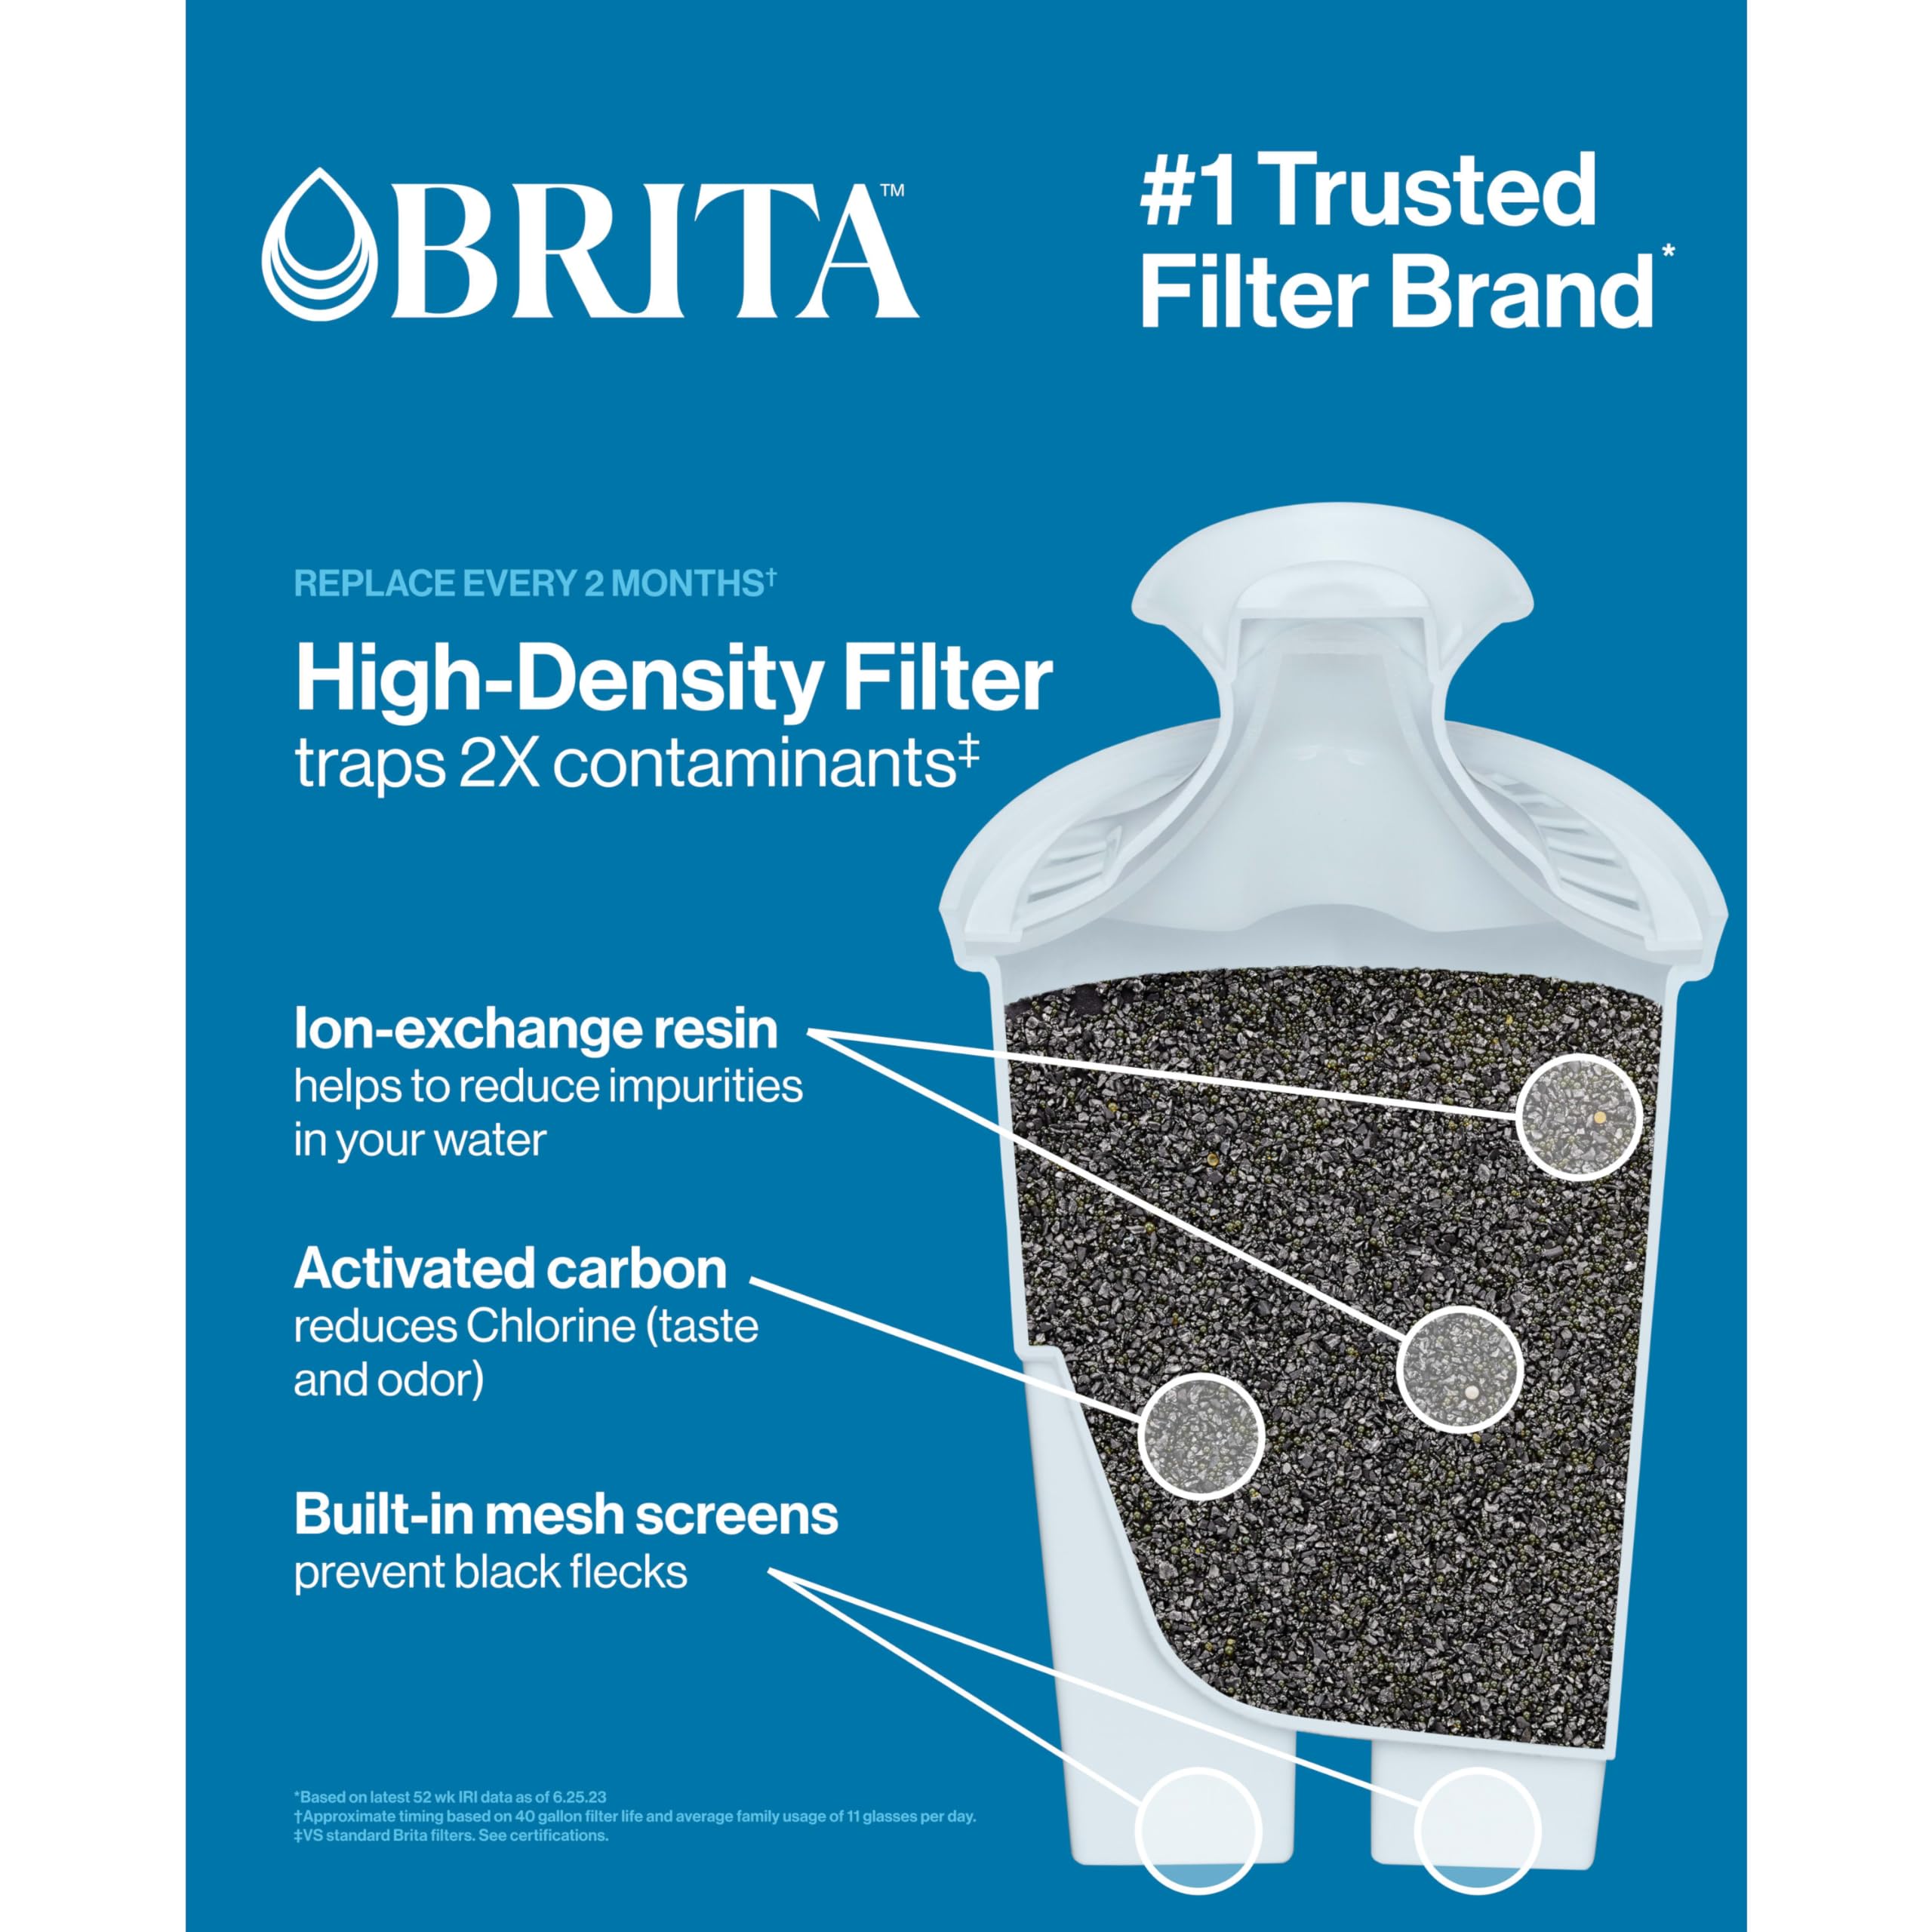 Brita Plus Water Filter, High Density Replacement Filter for Pitchers and Dispensers, Reduces 2x Contaminants*, Lasts 2 Months, 4 Count